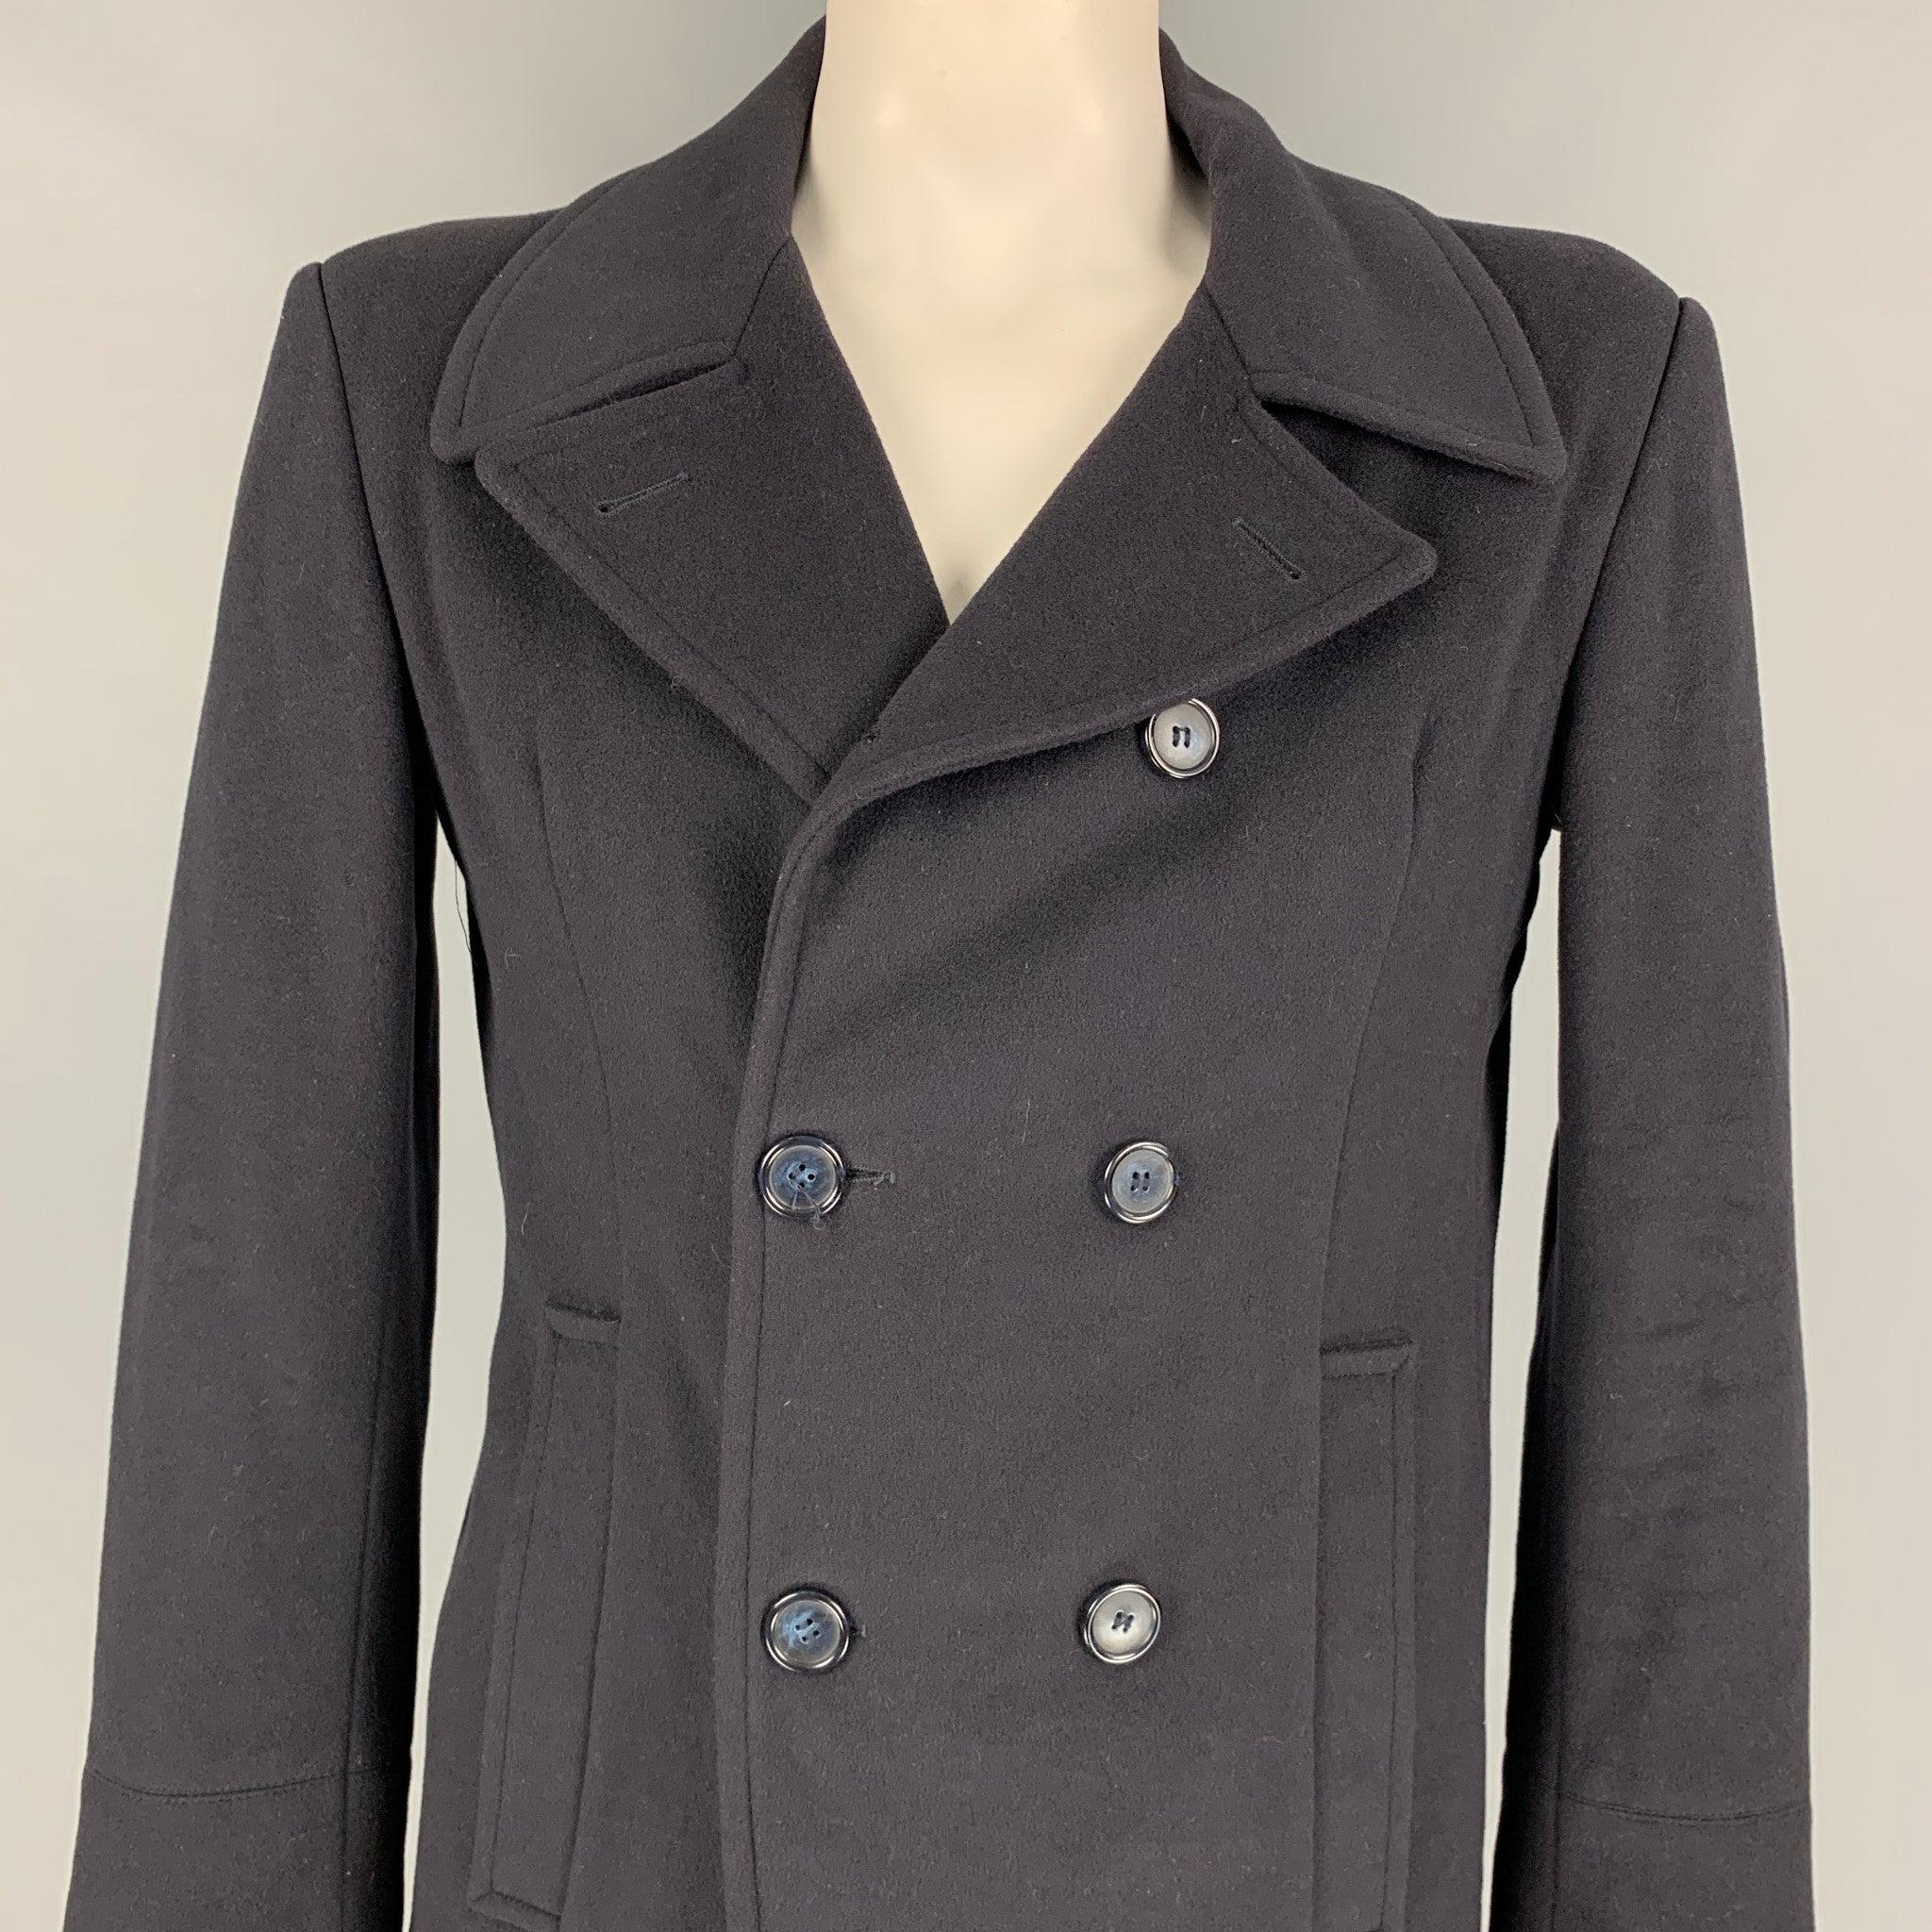 SAKS FIFTH AVENUE peacoat comes in a navy cashmere featuring a quilted liner, single back vent, and a double breasted closure.
Good
Pre-Owned Condition.  

Marked:   42 R 

Measurements: 
 
Shoulder: 19.5 inches  Chest: 42 inches  Sleeve: 26 inches 